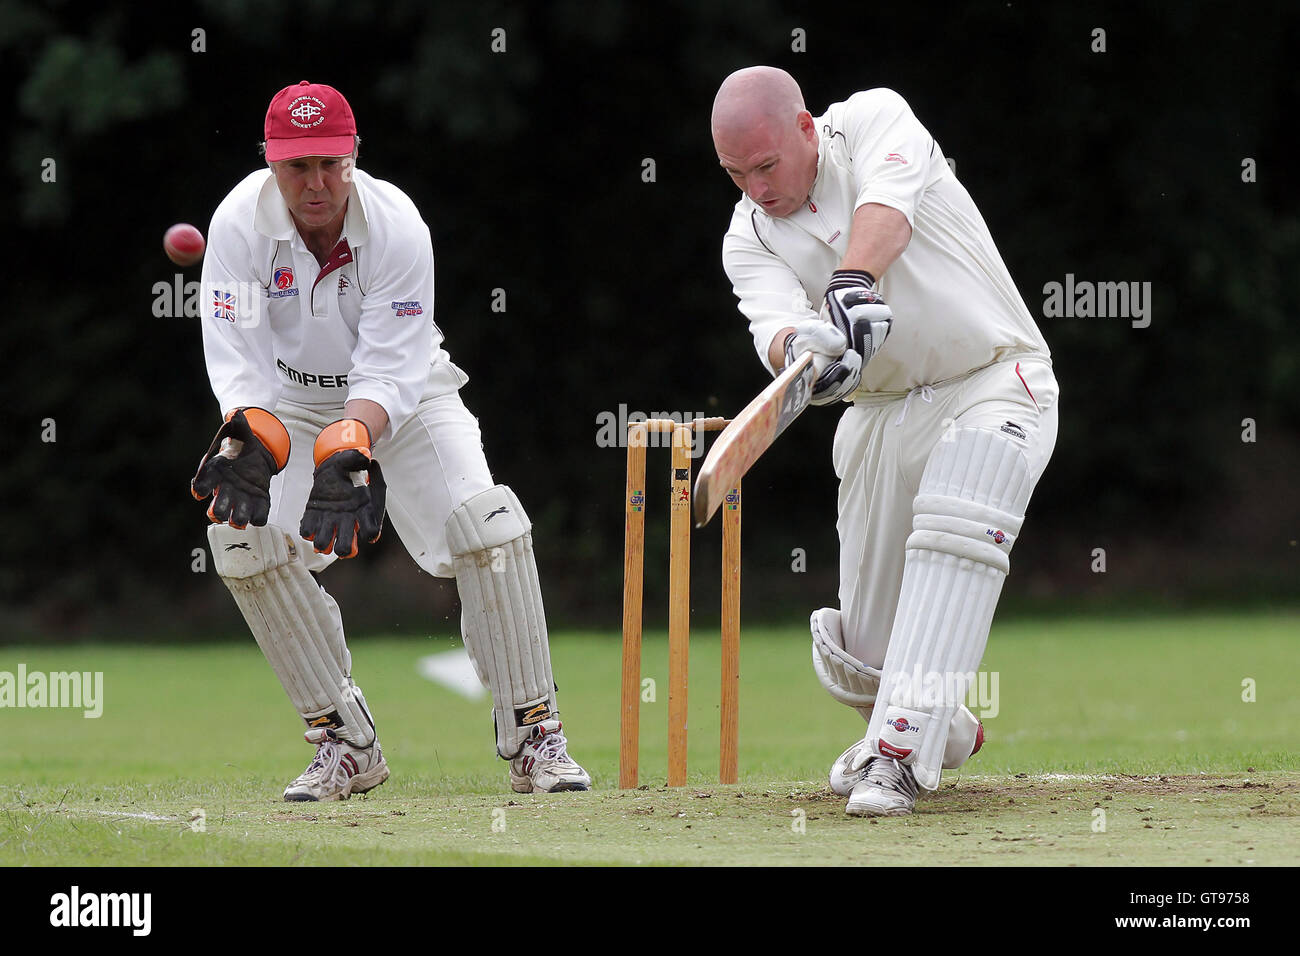 Danny Jones in batting action for Hornchurch - Hornchurch CC 5th XI vs Upminster CC 6th XI - Essex Cricket League at Met Police Sports Ground, Chigwell - 25/06/11 Stock Photo